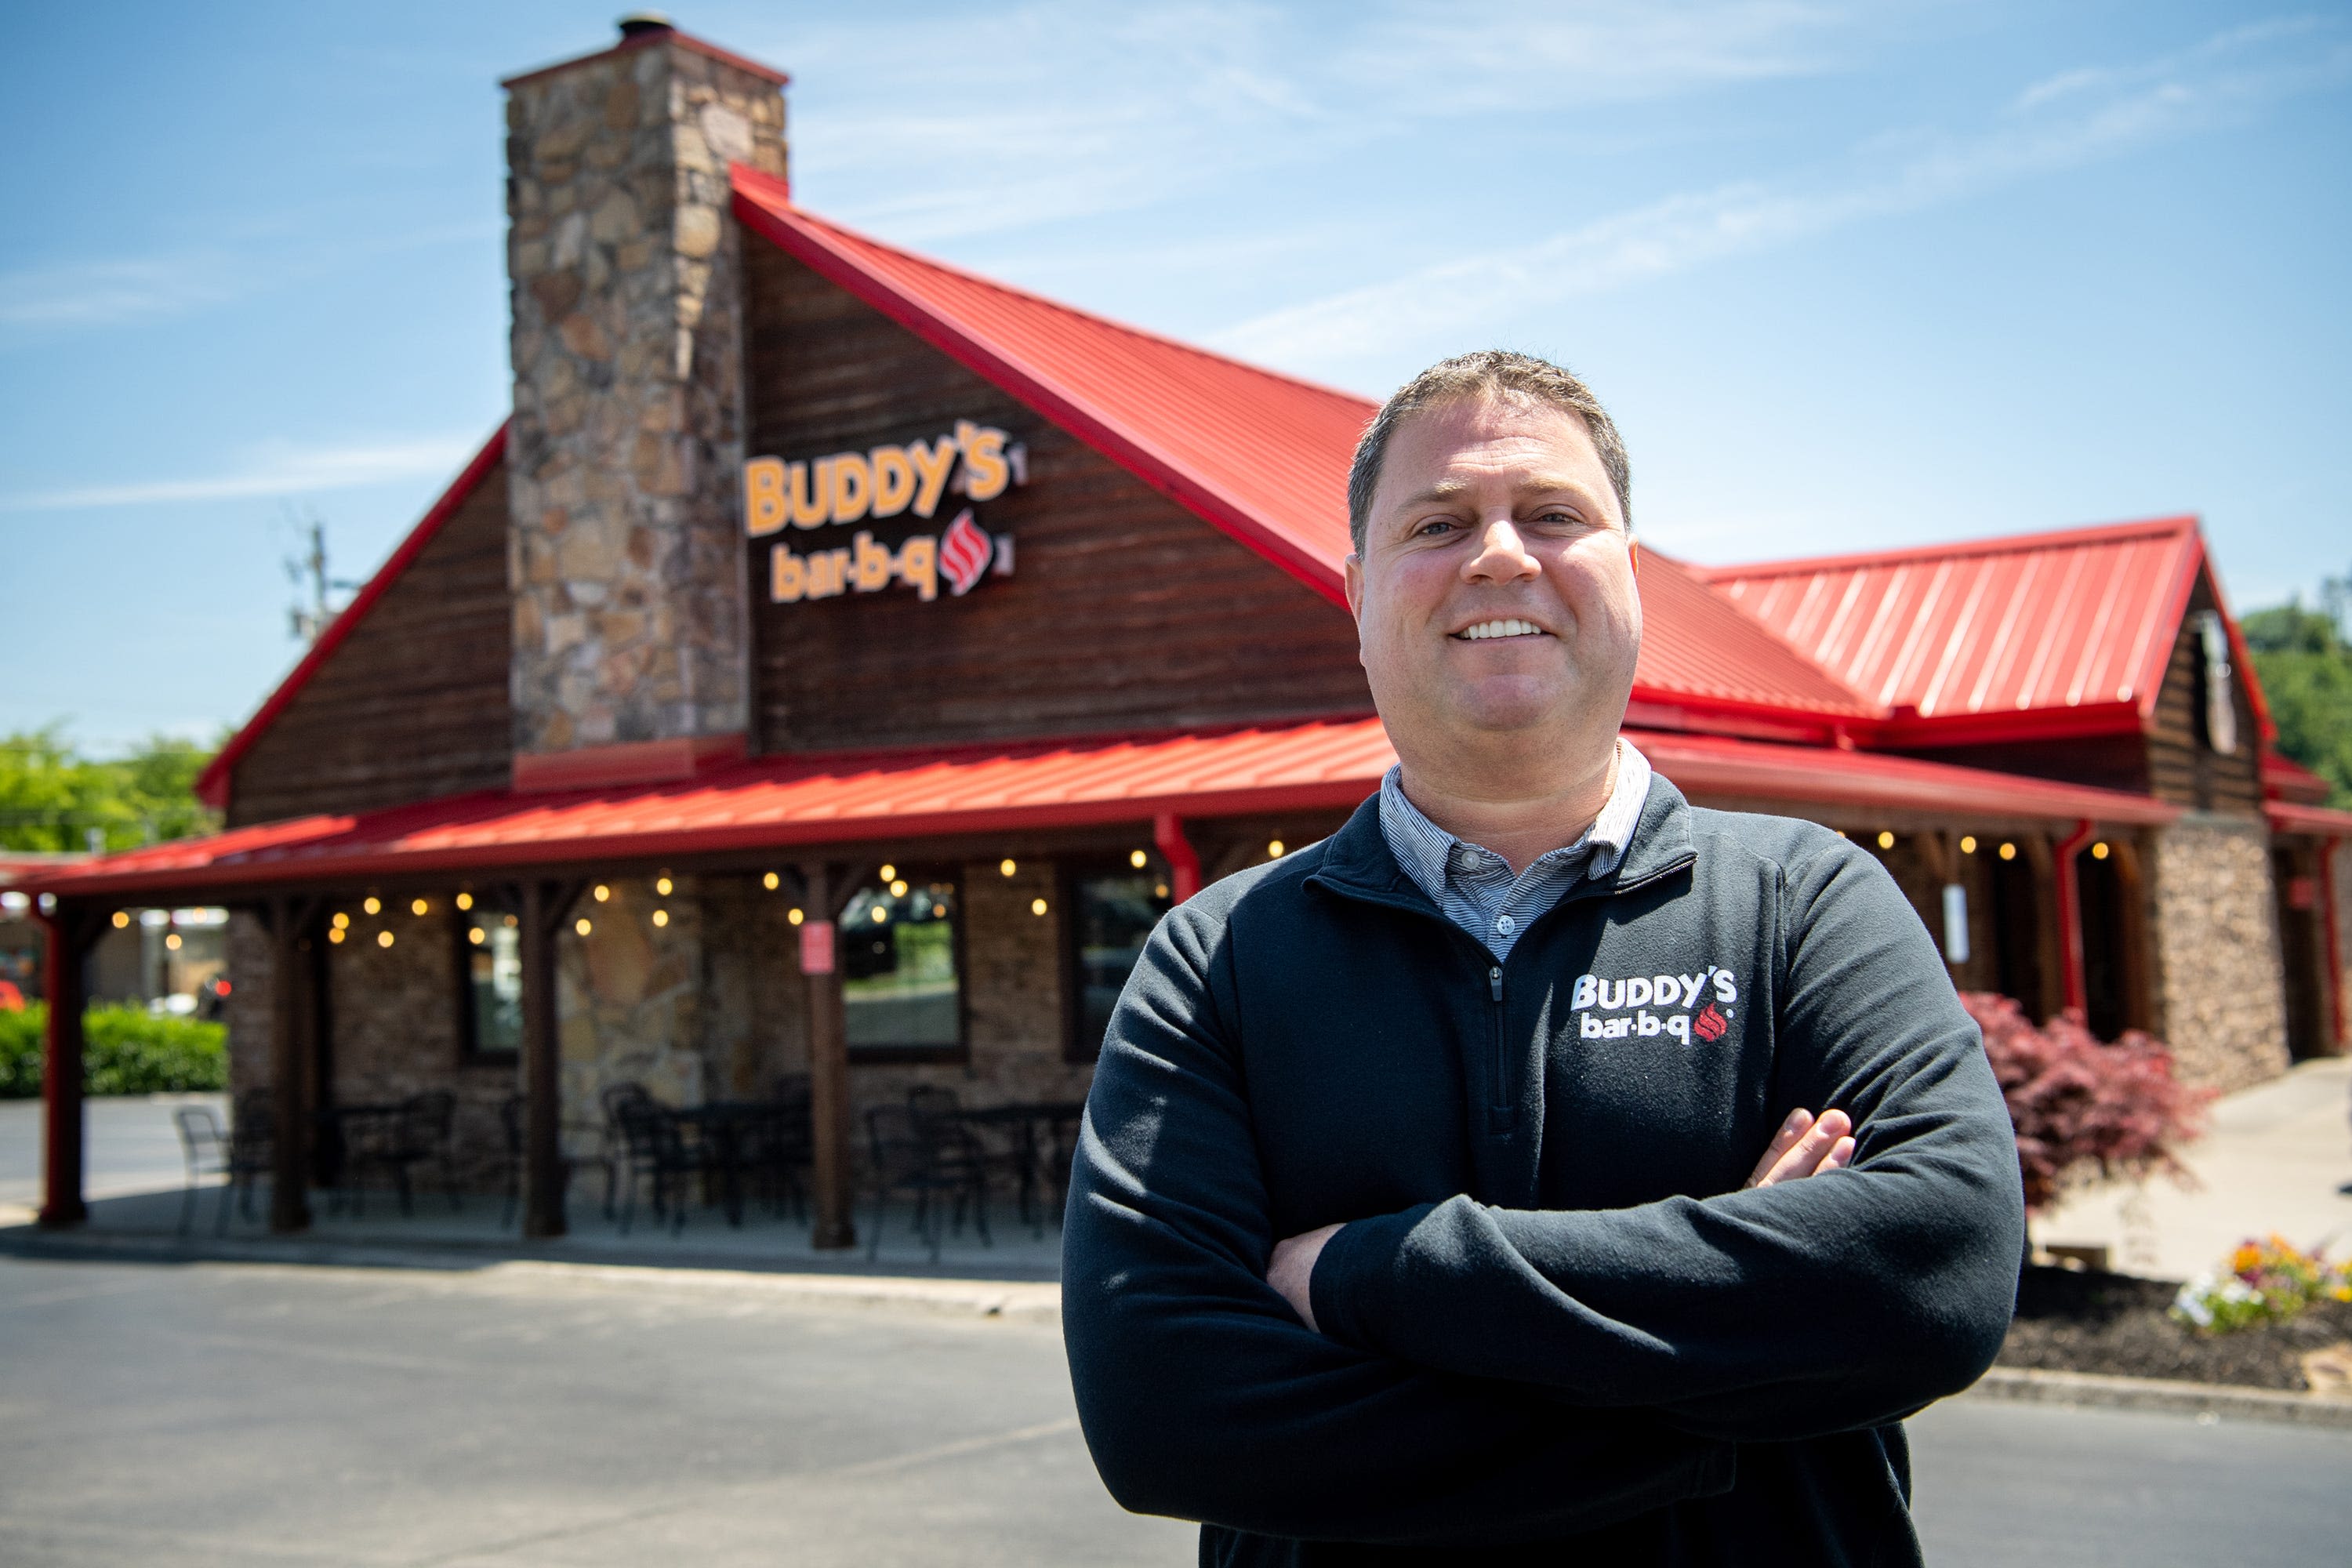 Buddy's Bar-B-Q plans to expand, eyeing locations outside of Tennessee